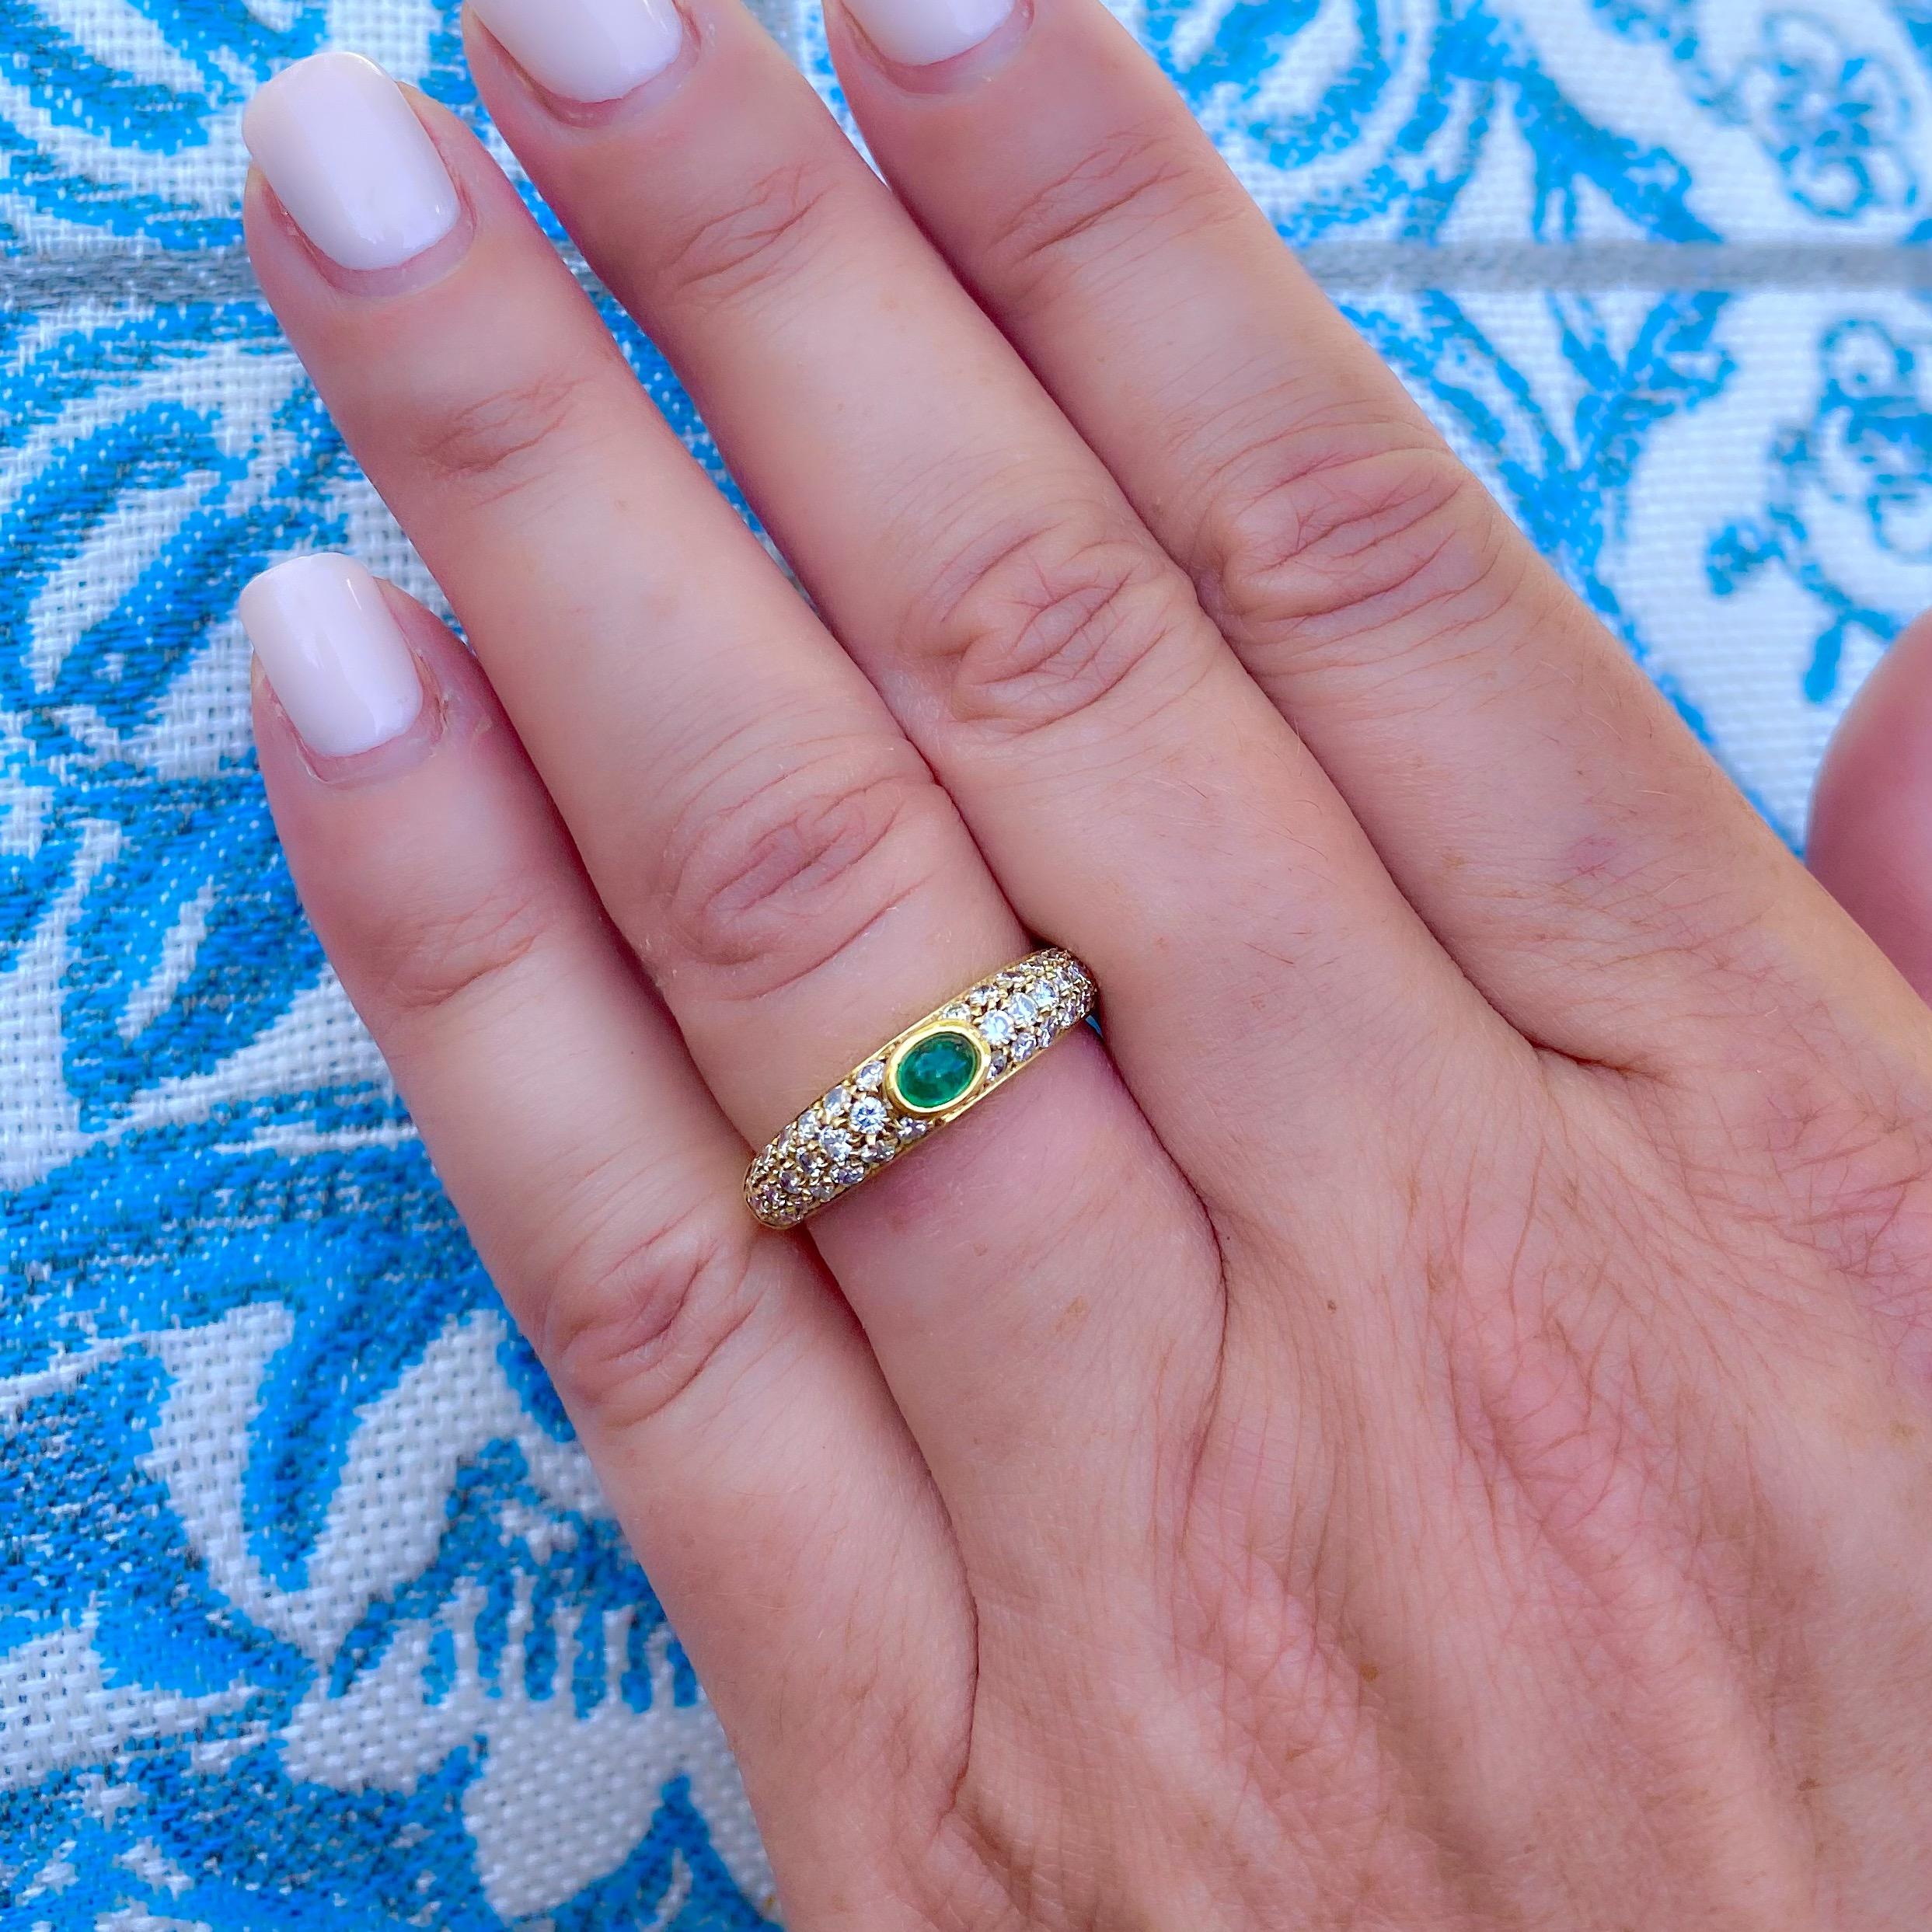 Of classic 1970's style, this 18k yellow gold narrow domed ring centers a bezel-set oval emerald cabochon weighing 0.22-ct., with pave-set round brilliant-cut diamonds weighing in total 0.63-ct. The ring weighs 4.6 grams, and is currently size 7.5,